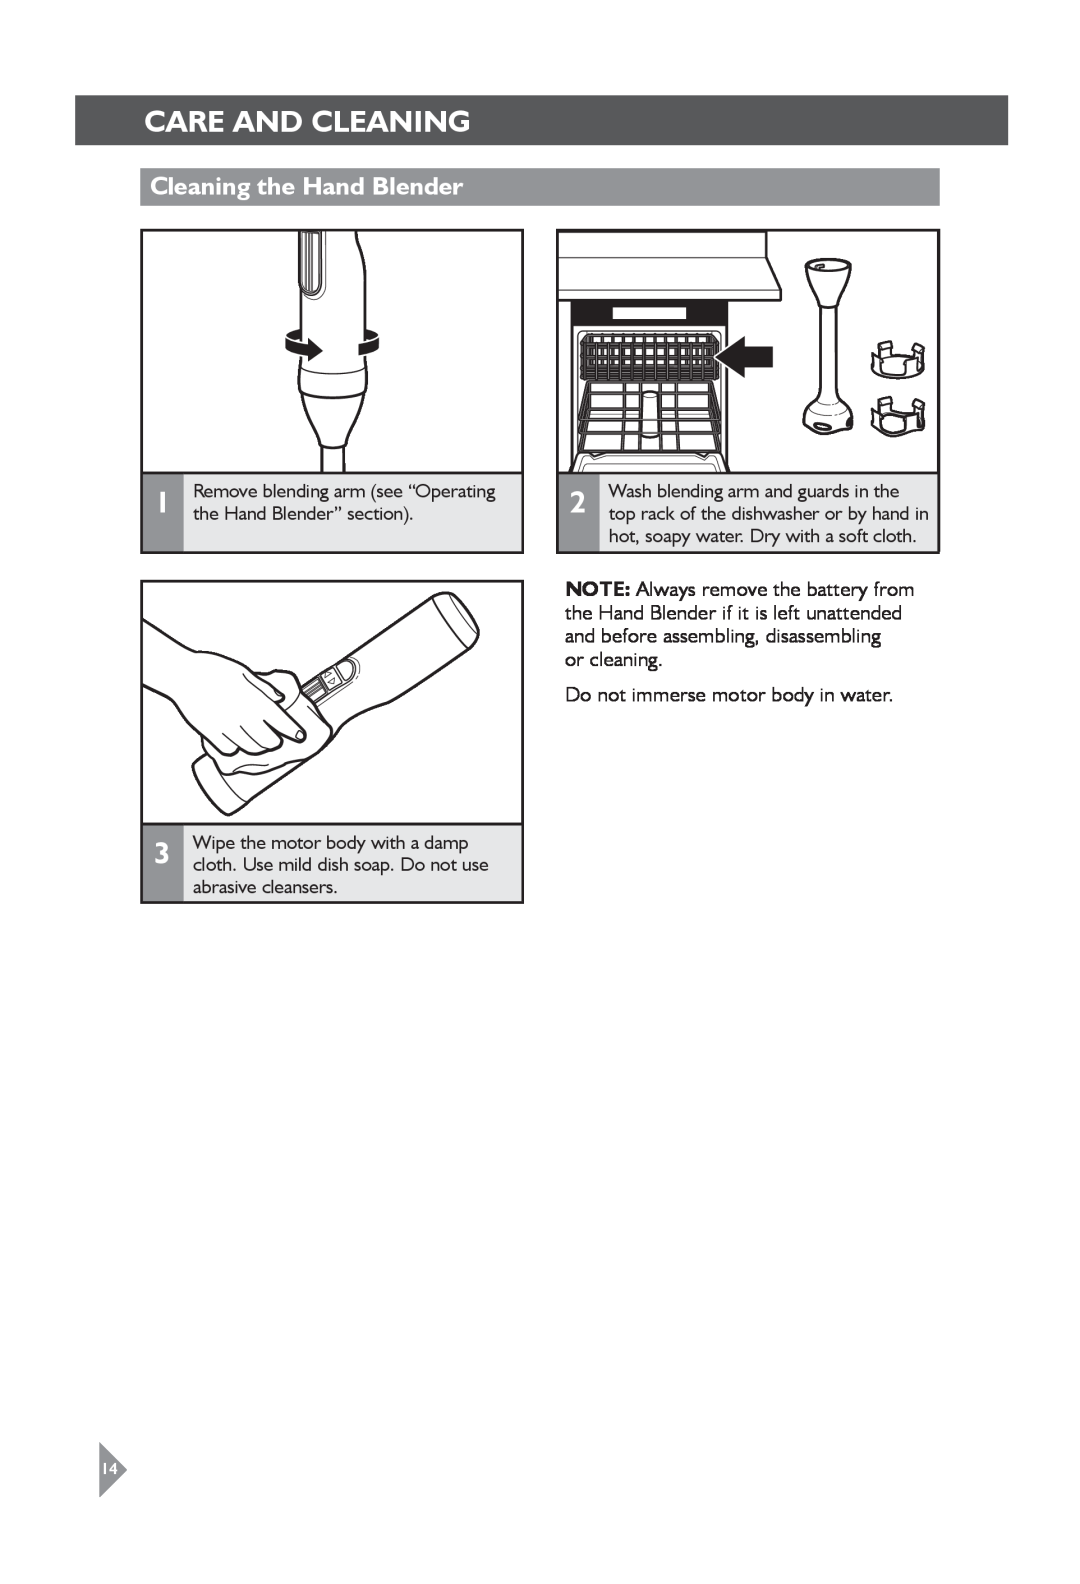 KitchenAid 5KHB3583 manual care and cleaning, Cleaning the Hand Blender, Remove blending arm see “Operating 